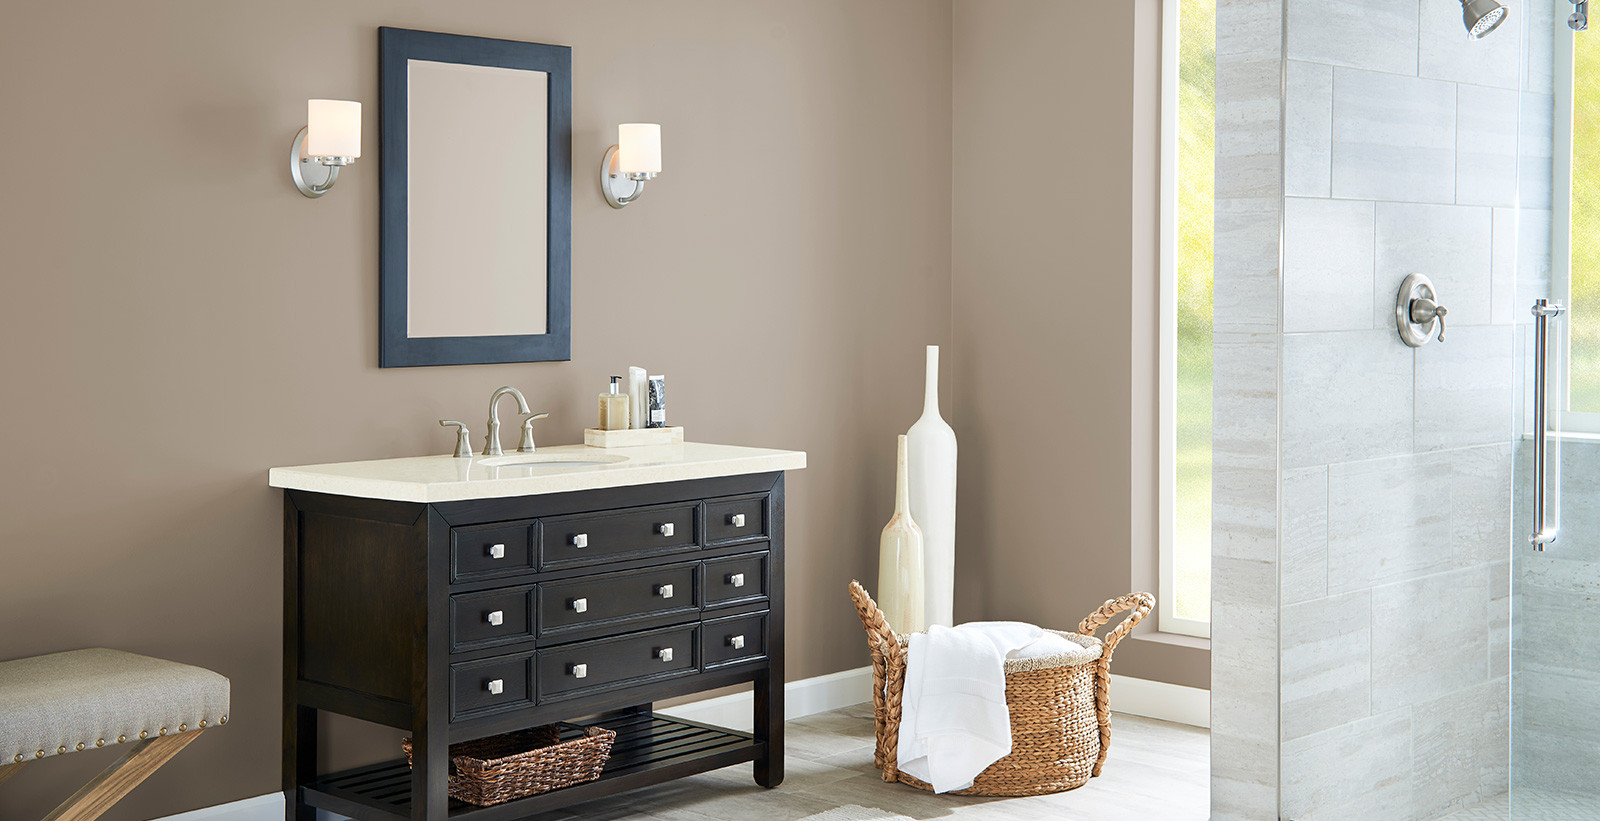 Bathroom Paint Colors Behr
 Versatile and fortable Bathroom Ideas and Inspiration